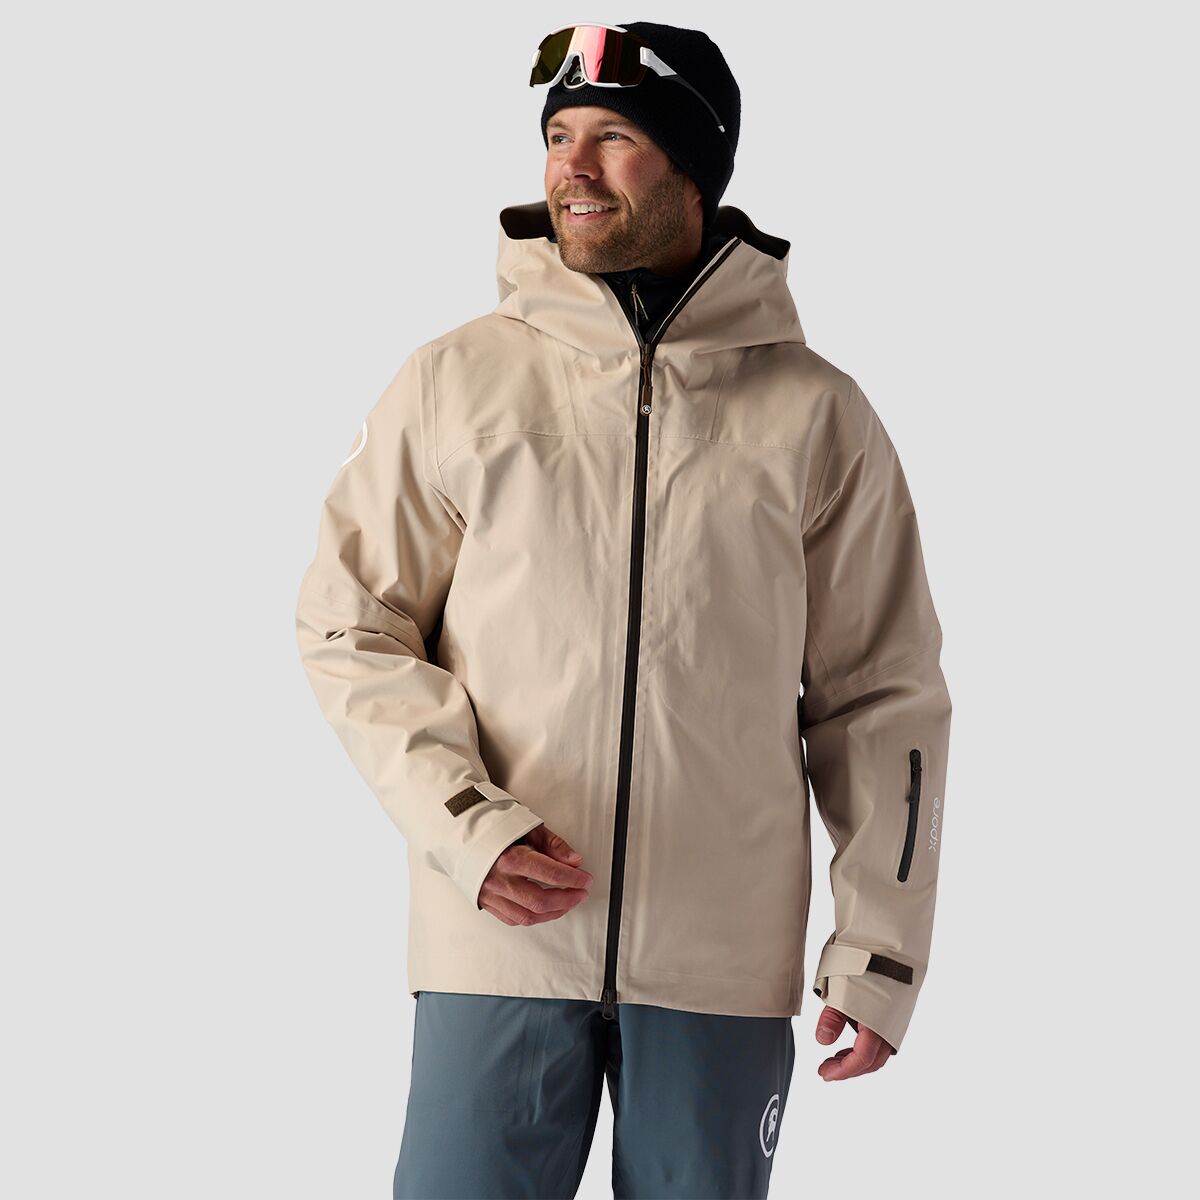 Backcountry XPORE Stretch Performance Shell Jacket - Men's